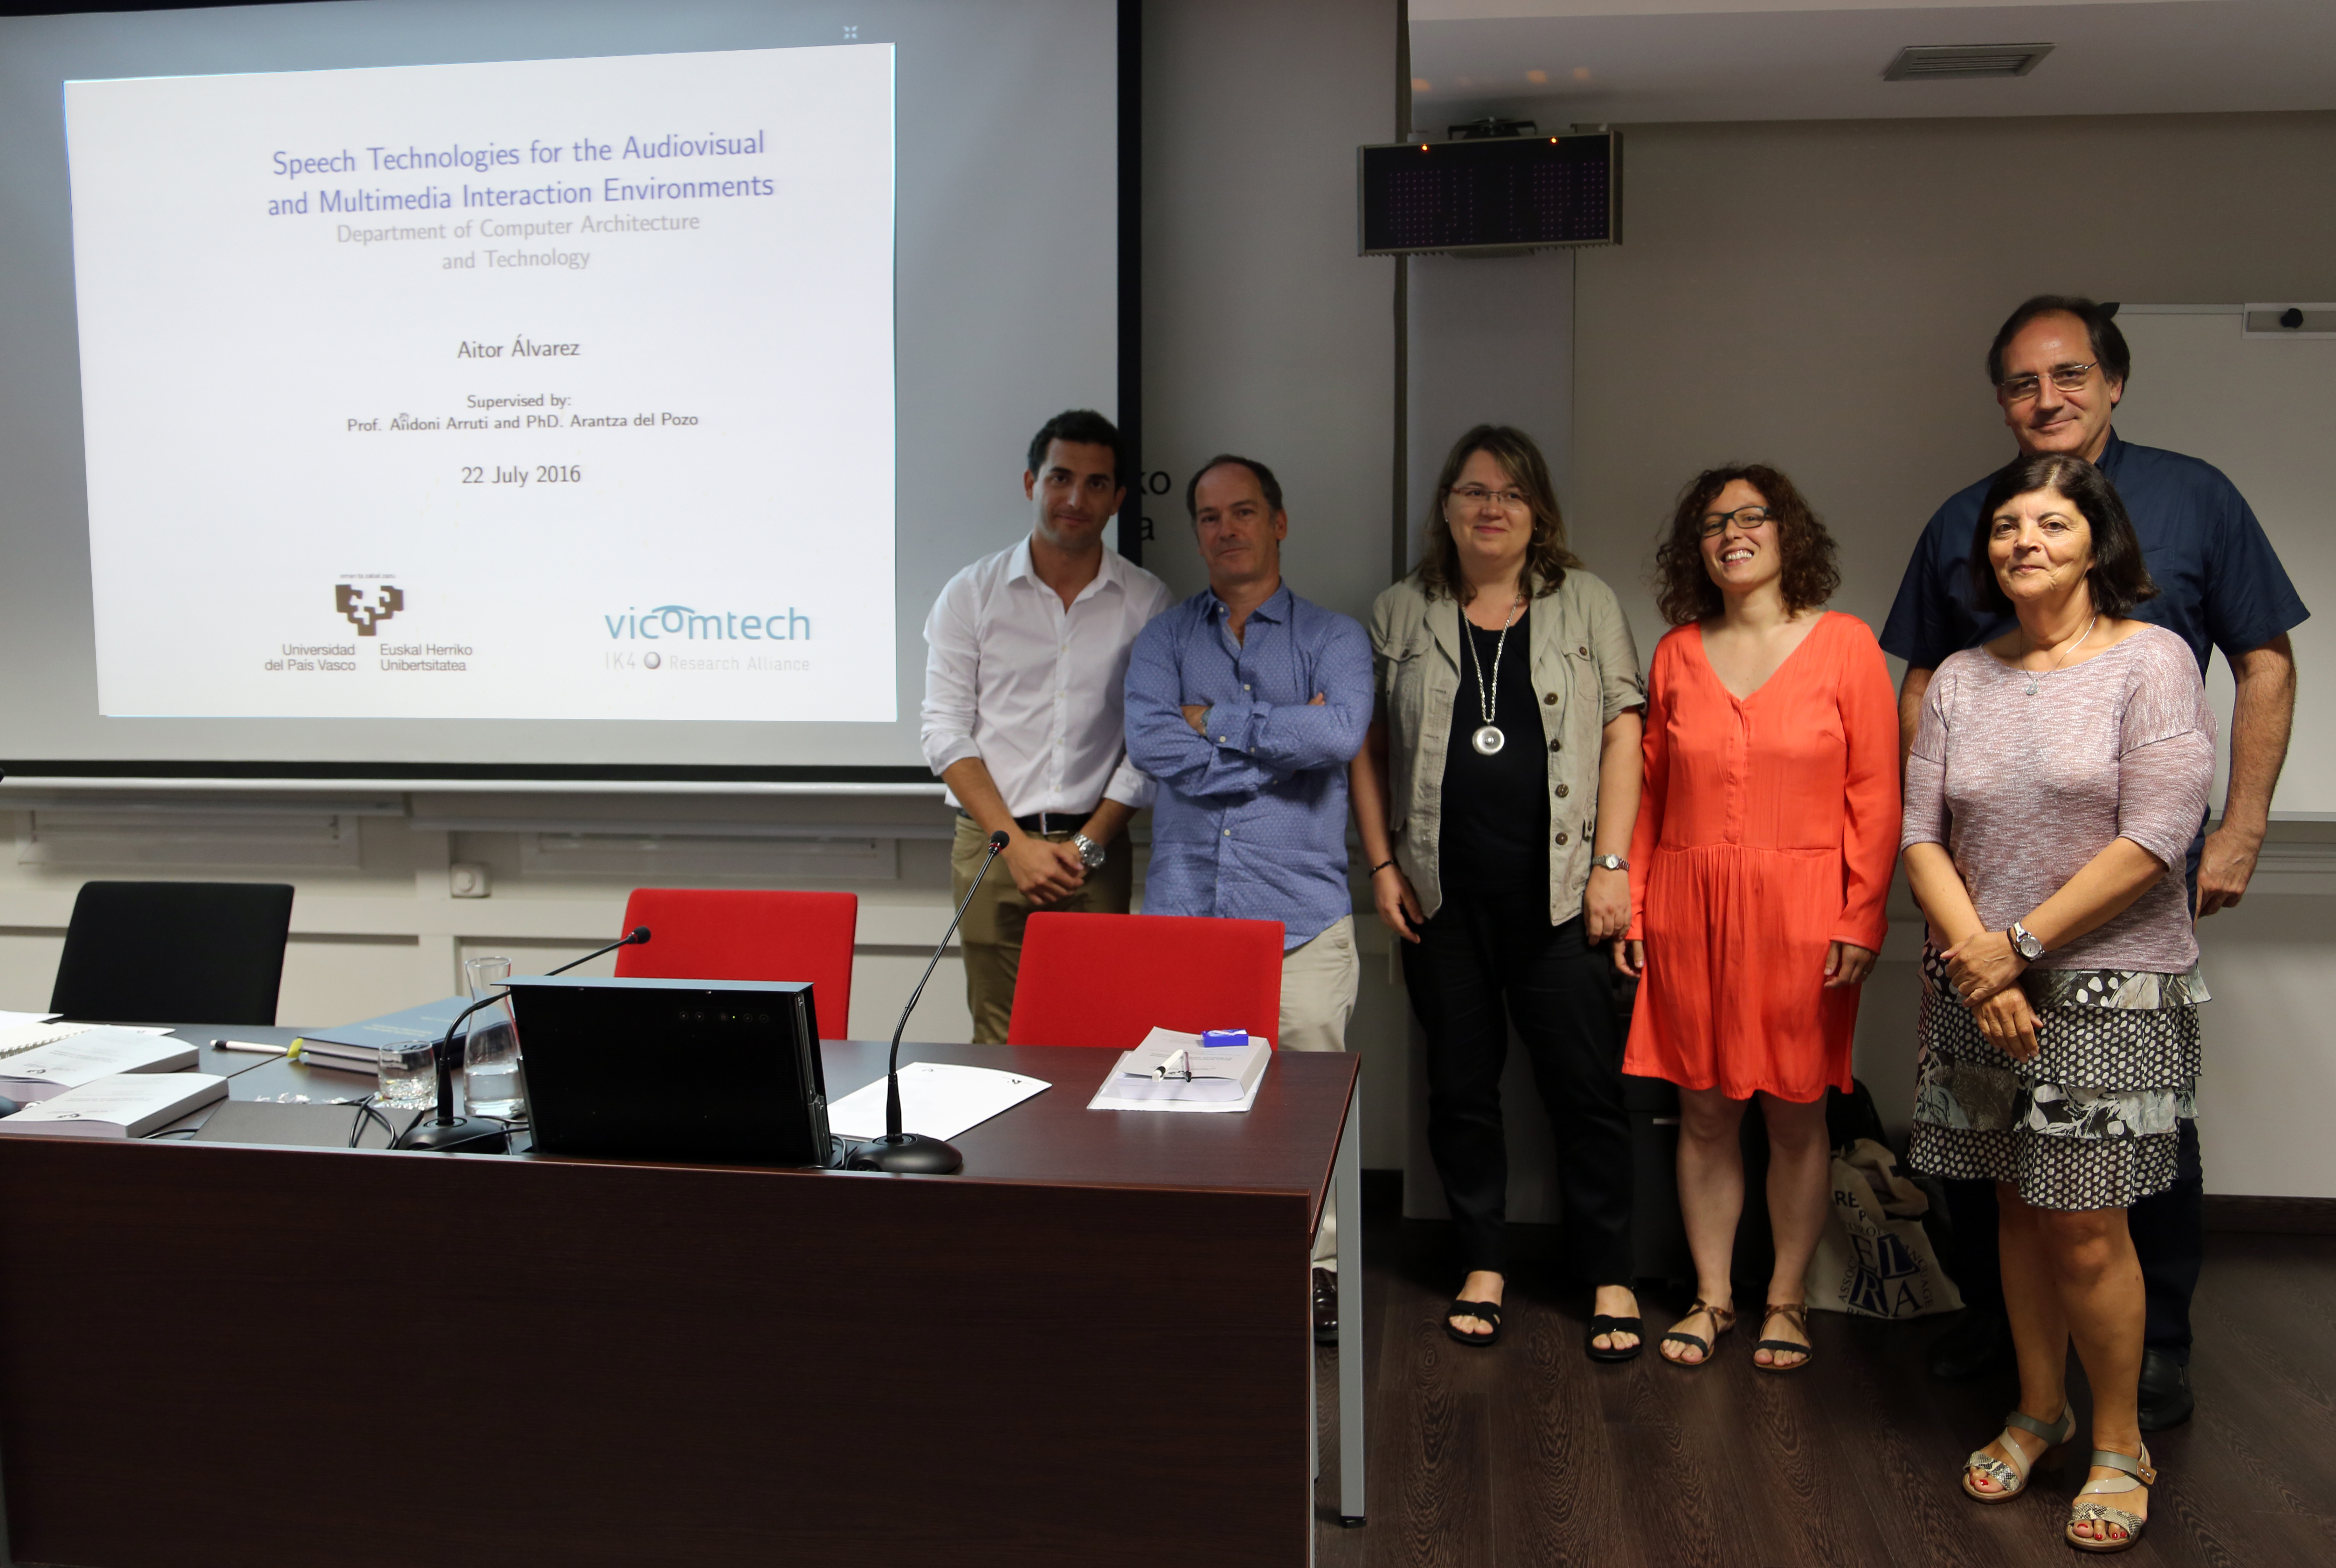 Aitor Alvarez presented his doctoral dissertation:  Speech Technologies for the Audiovisual and Multimedia Interaction Environments